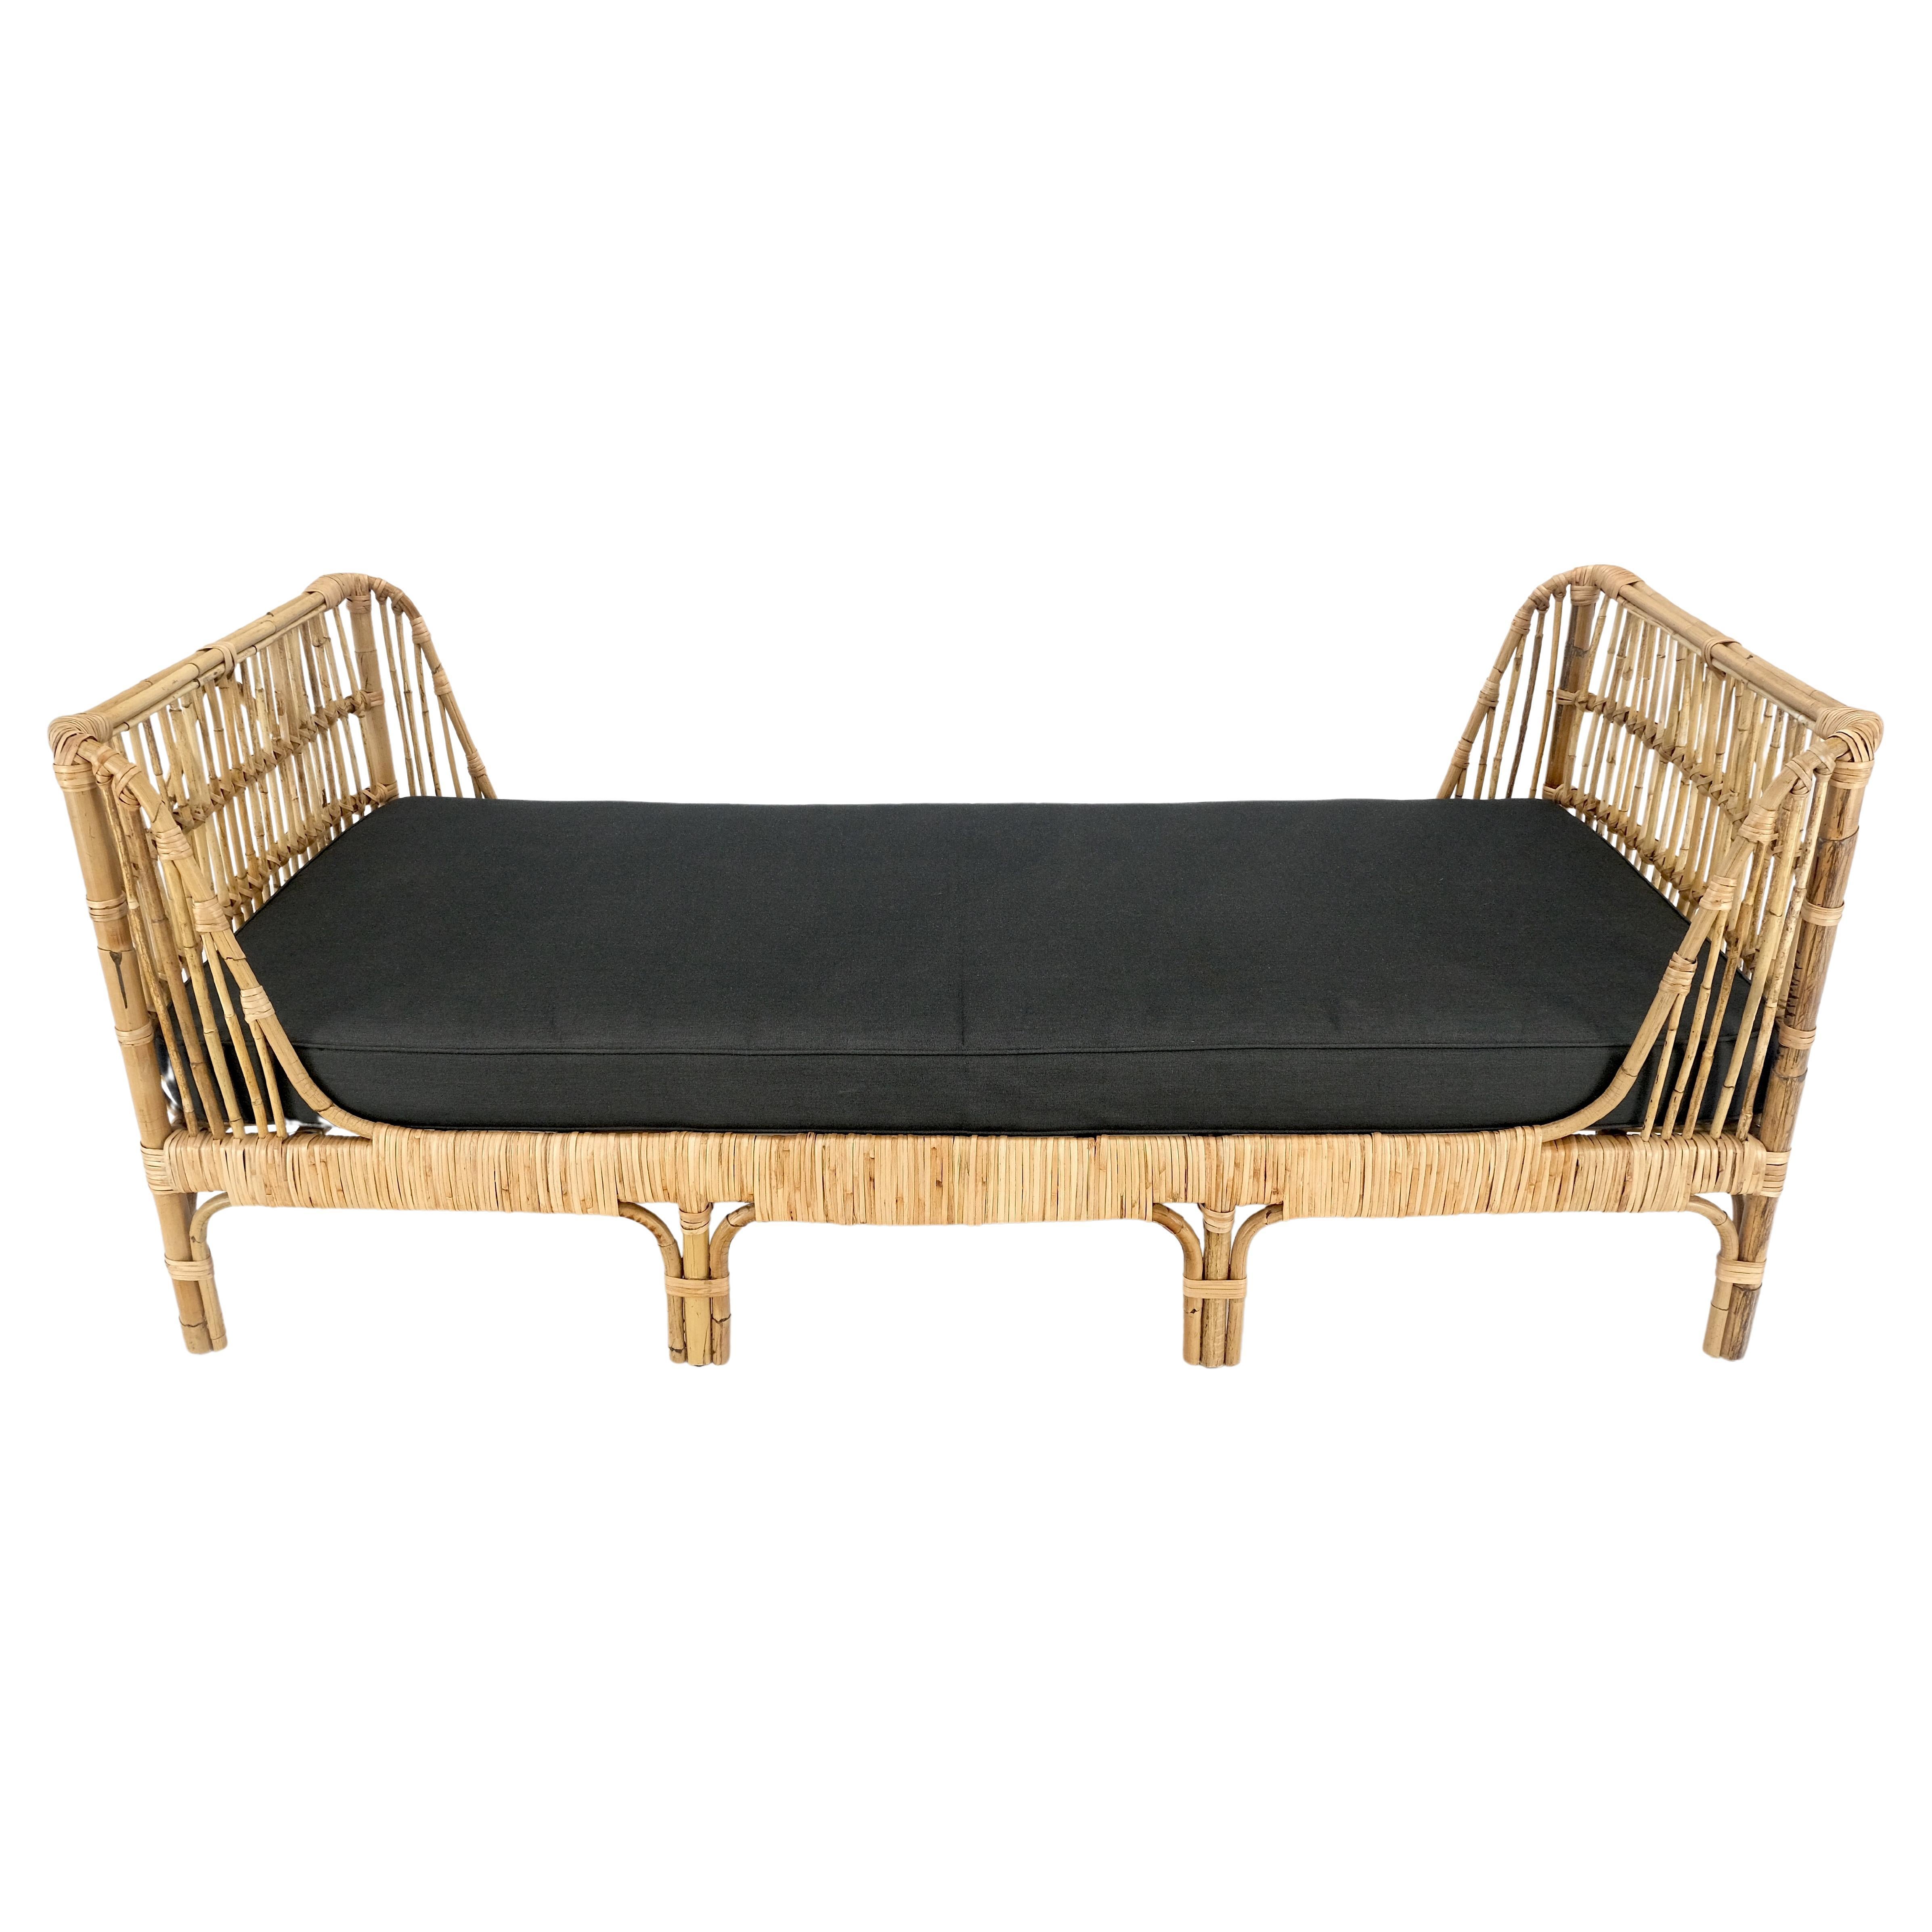 Rattan Bamboo Daybed Black Linen Cushion Mid Century Modern Style MINT For Sale